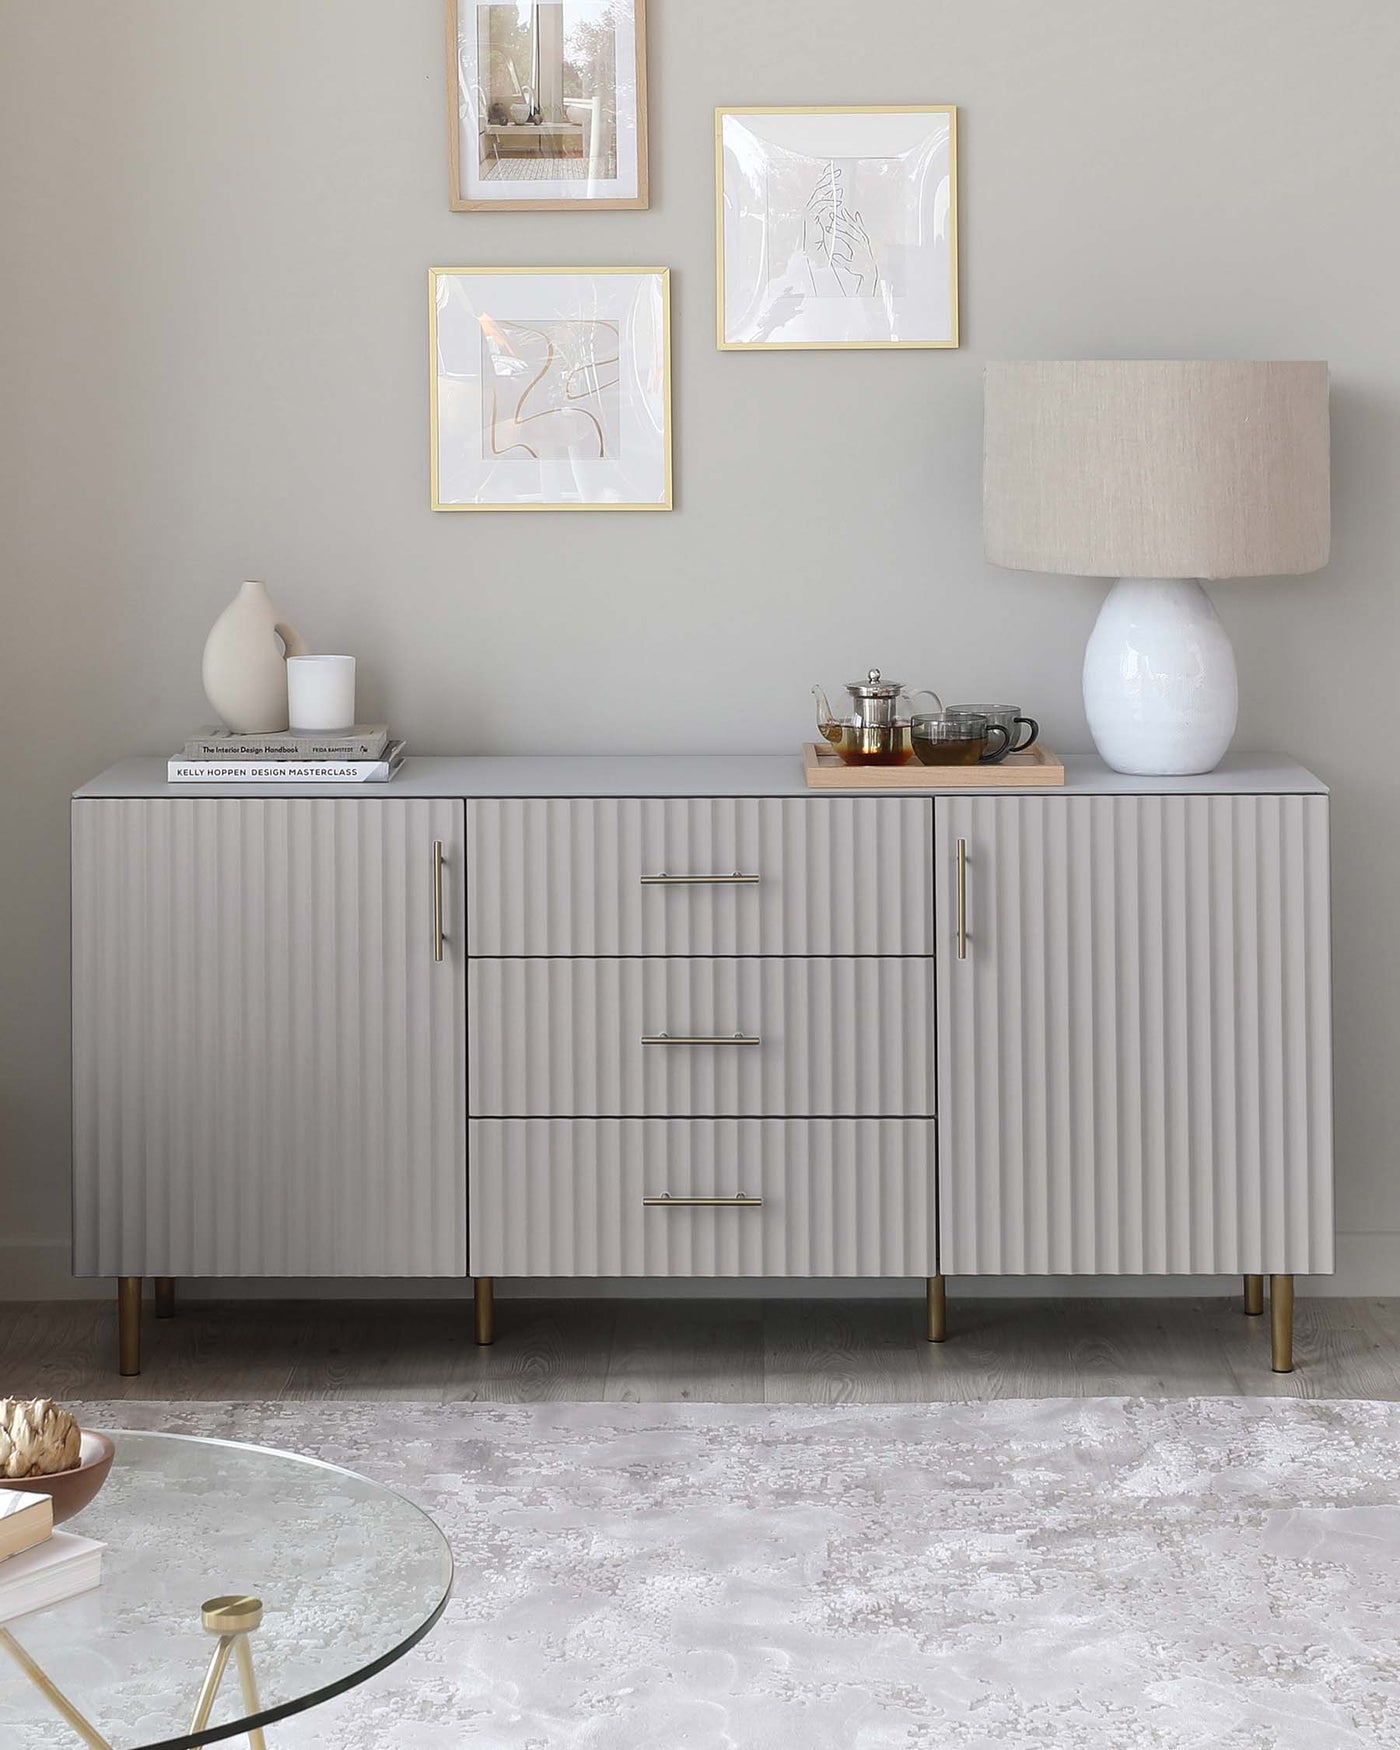 Modern light grey sideboard with ribbed texture on doors and drawers, accented with sleek metallic handles and brass-finished tapered legs, accompanied by a simple round glass-top coffee table with a thin golden base positioned on an ornate light-coloured area rug.